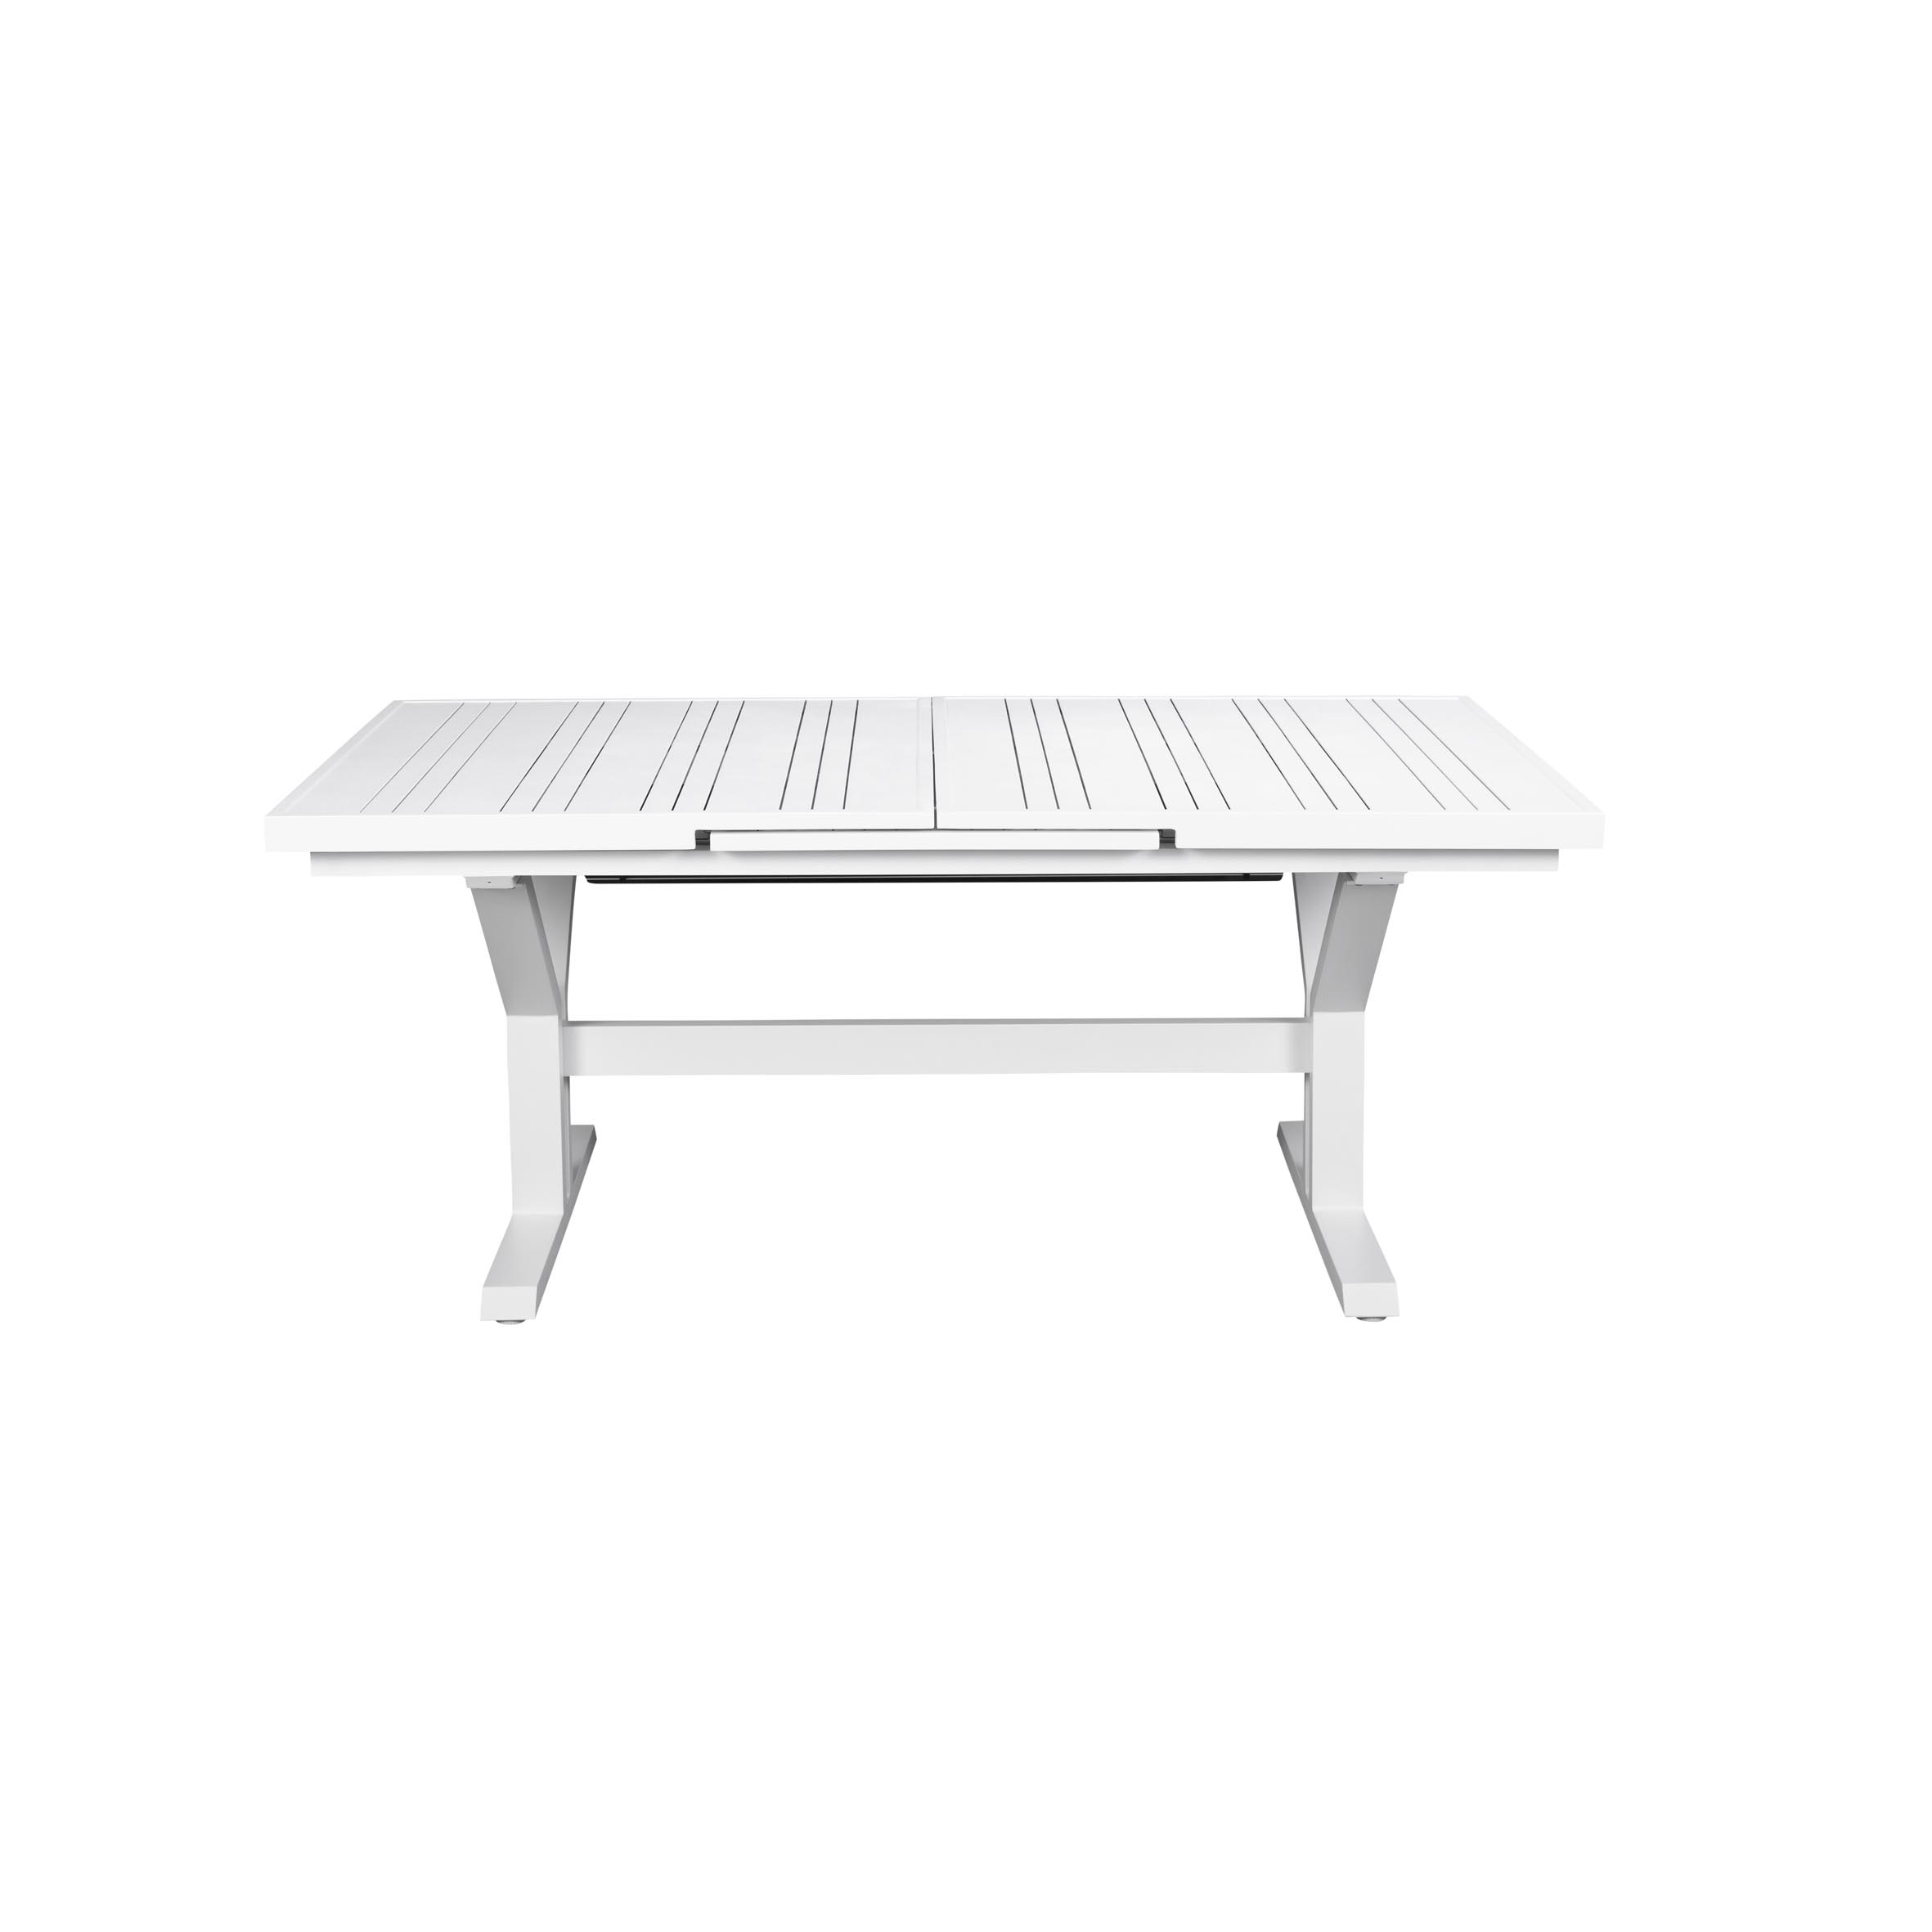 Tiffany auto extension table S3